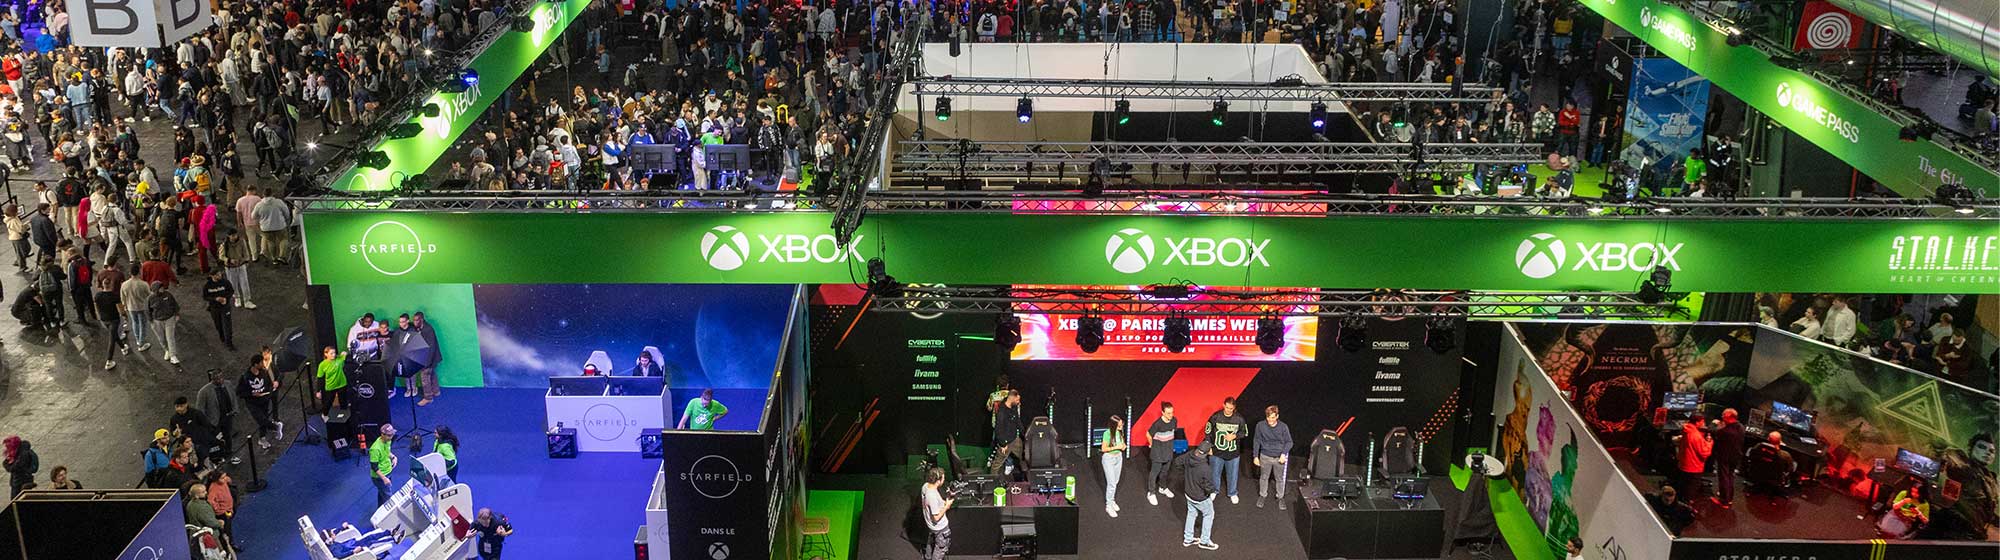 All visitors around the Xbox stand